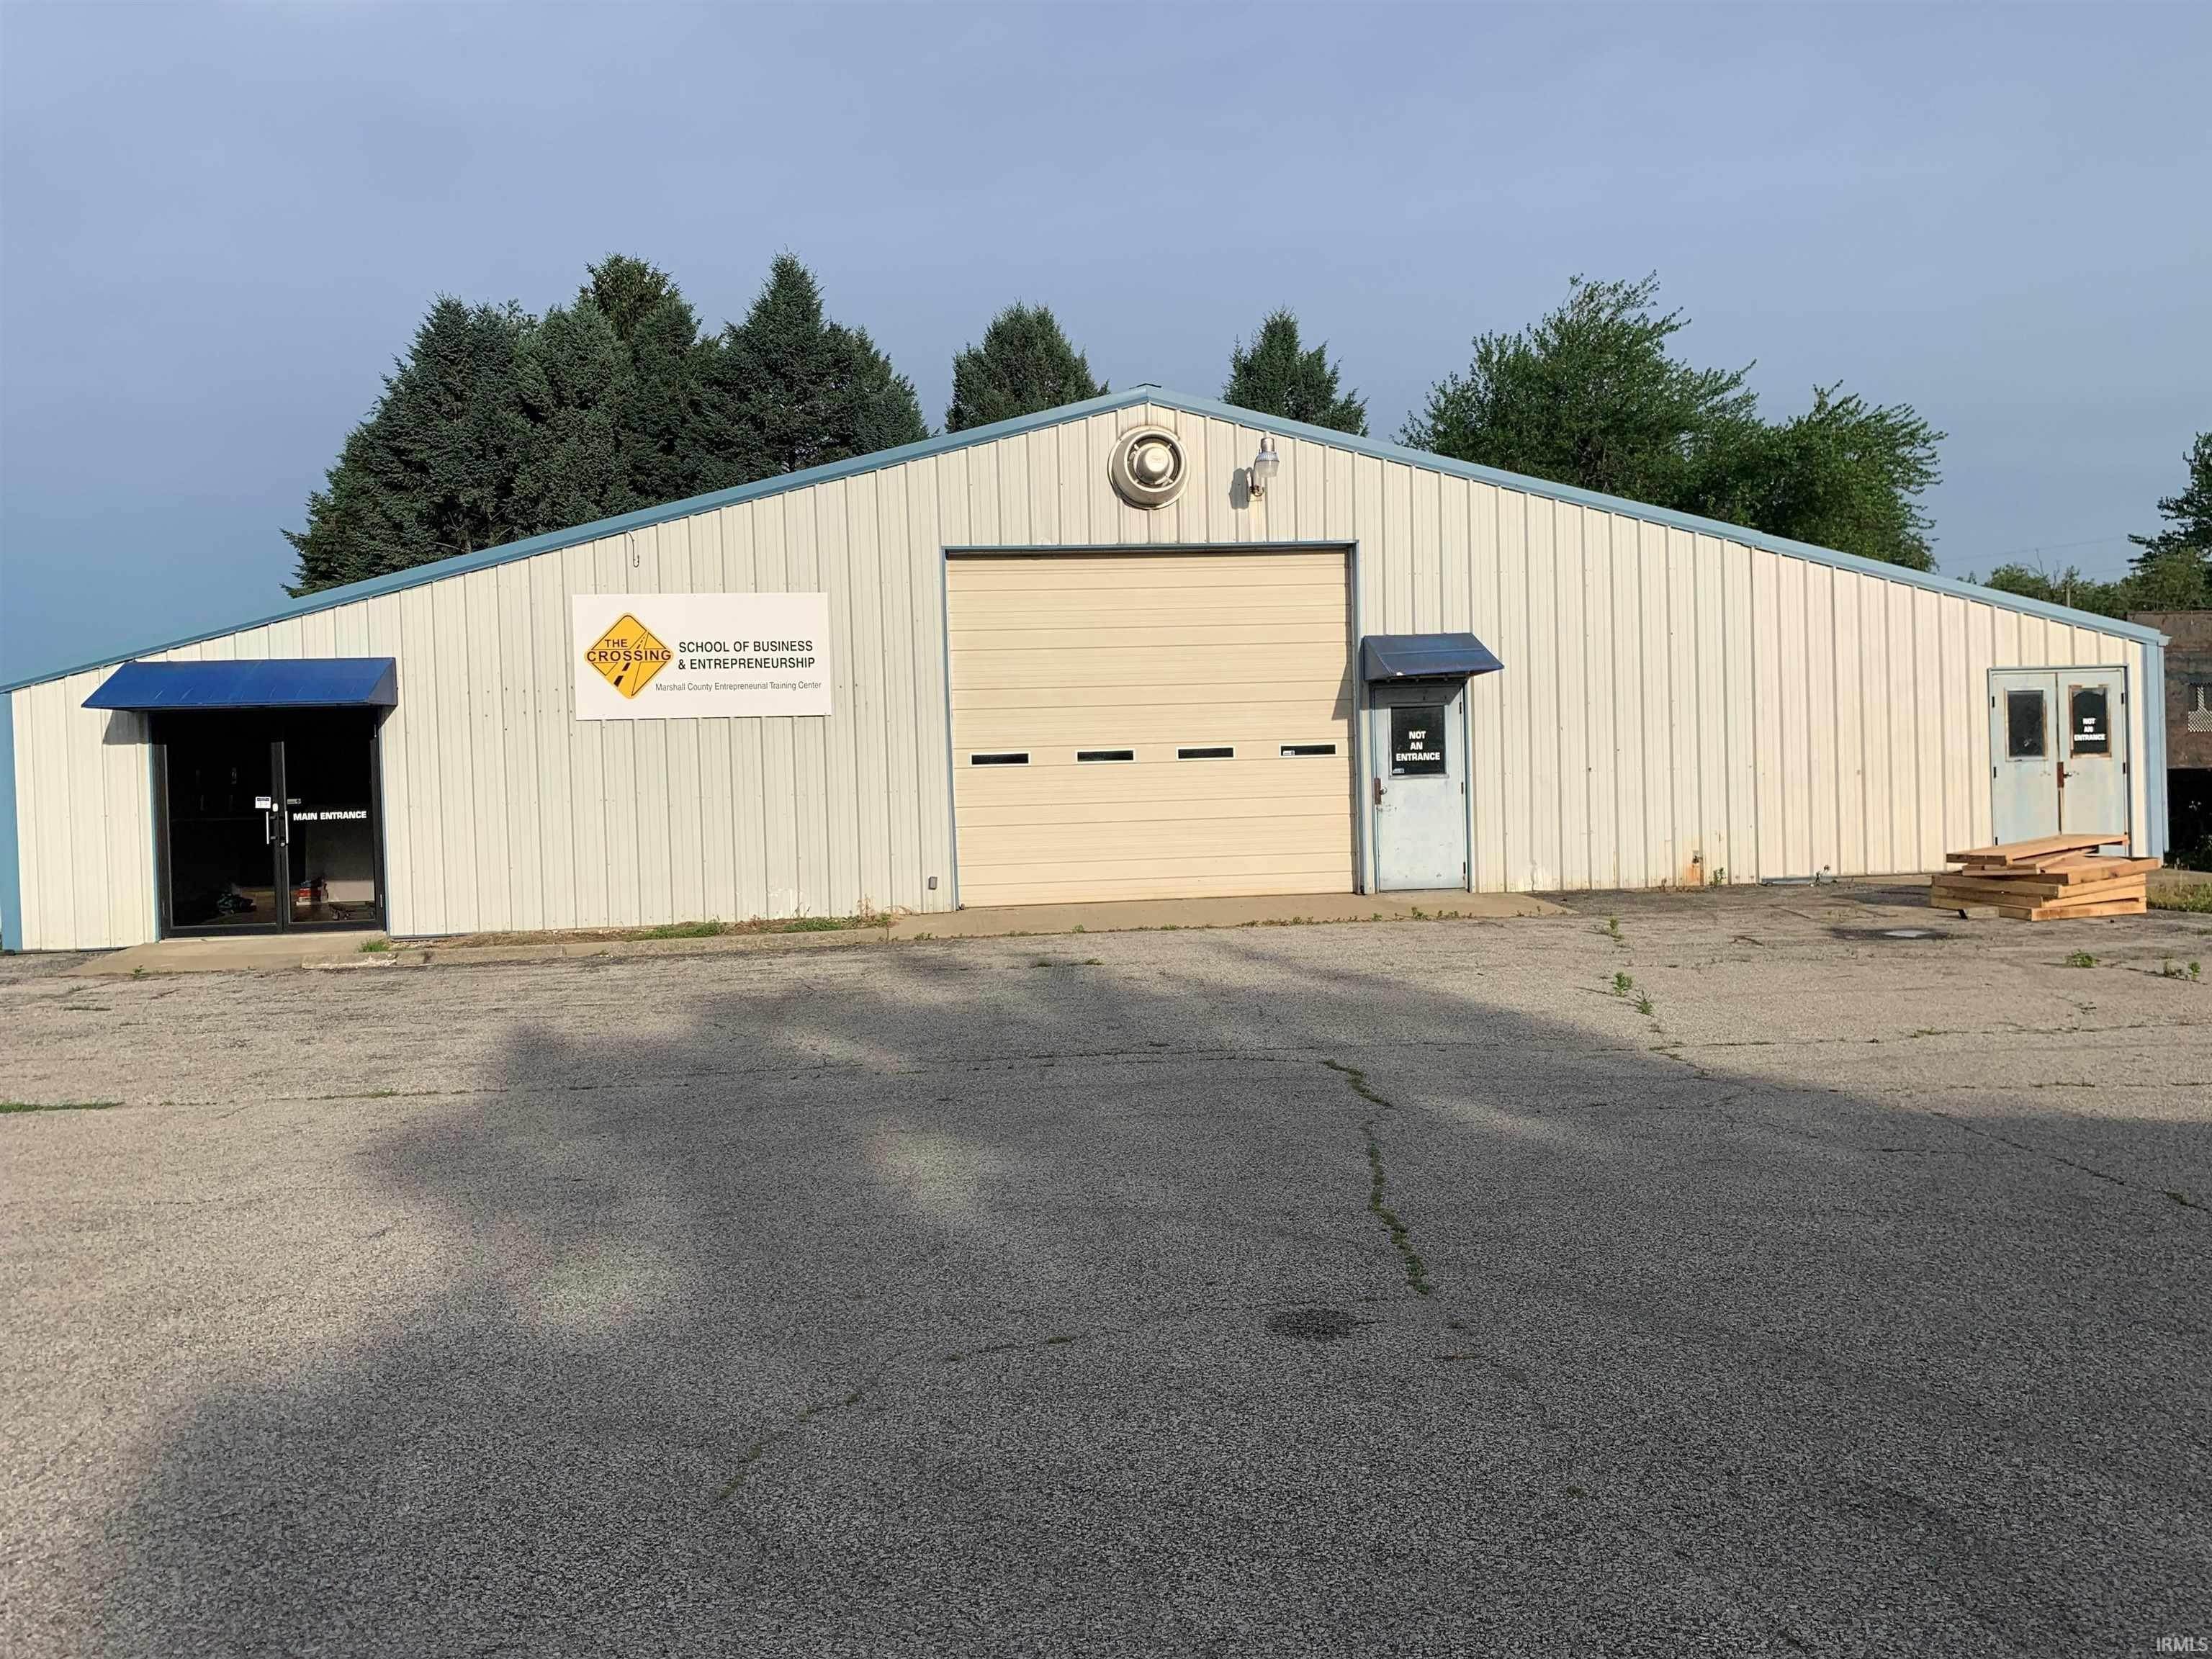 Comm / Ind Lease at 16095 Linden Road Argos, Indiana 46501 United States